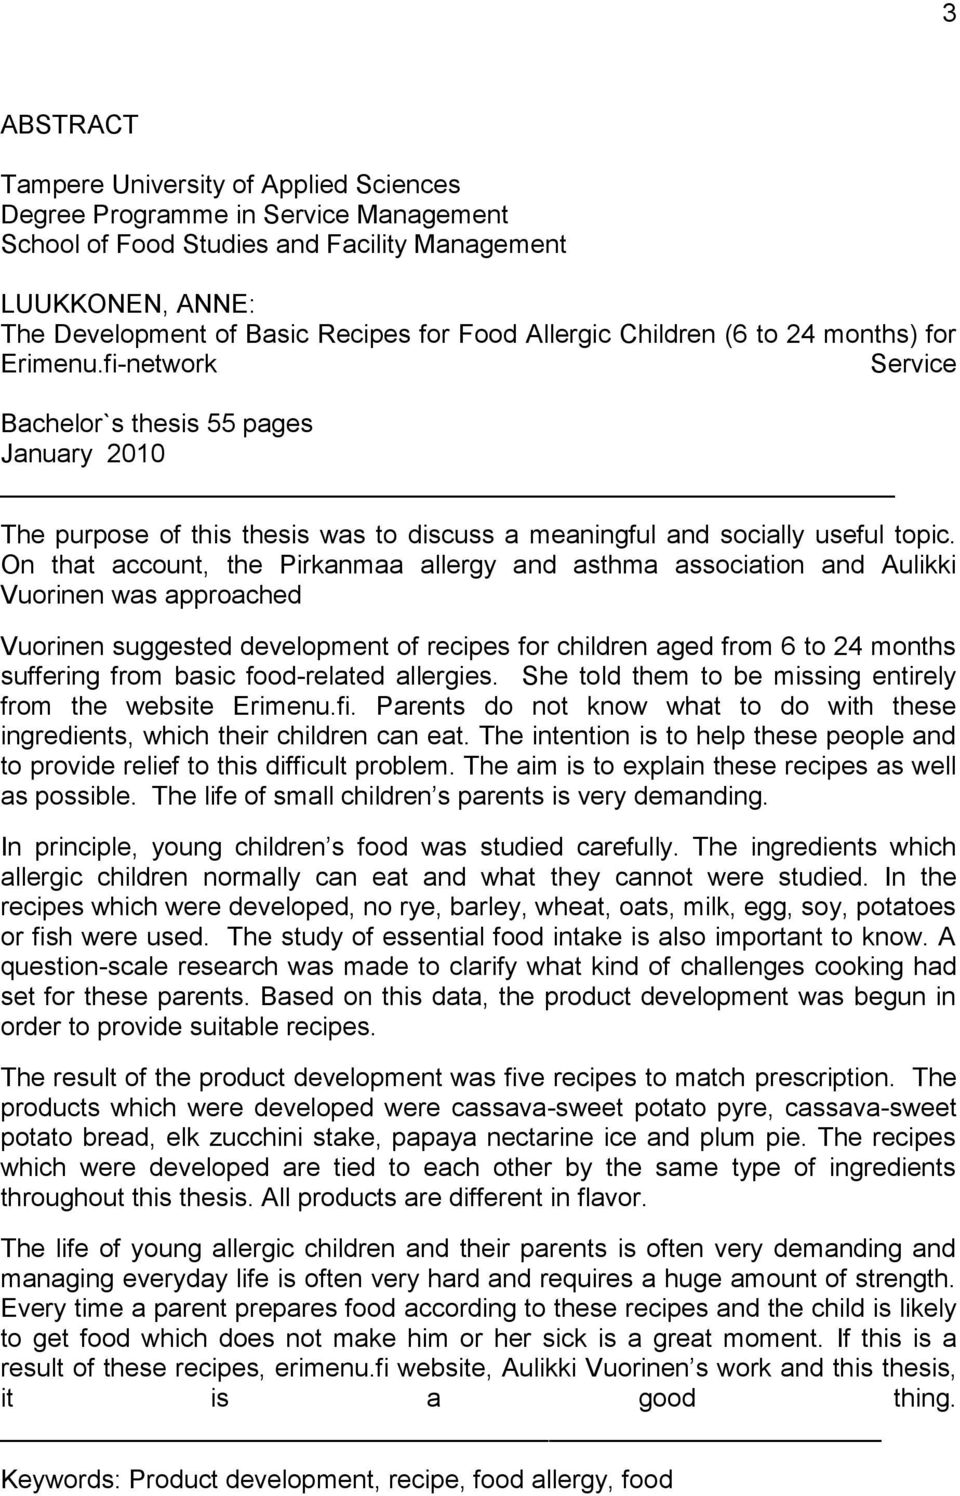 On that account, the Pirkanmaa allergy and asthma association and Aulikki Vuorinen was approached Vuorinen suggested development of recipes for children aged from 6 to 24 months suffering from basic